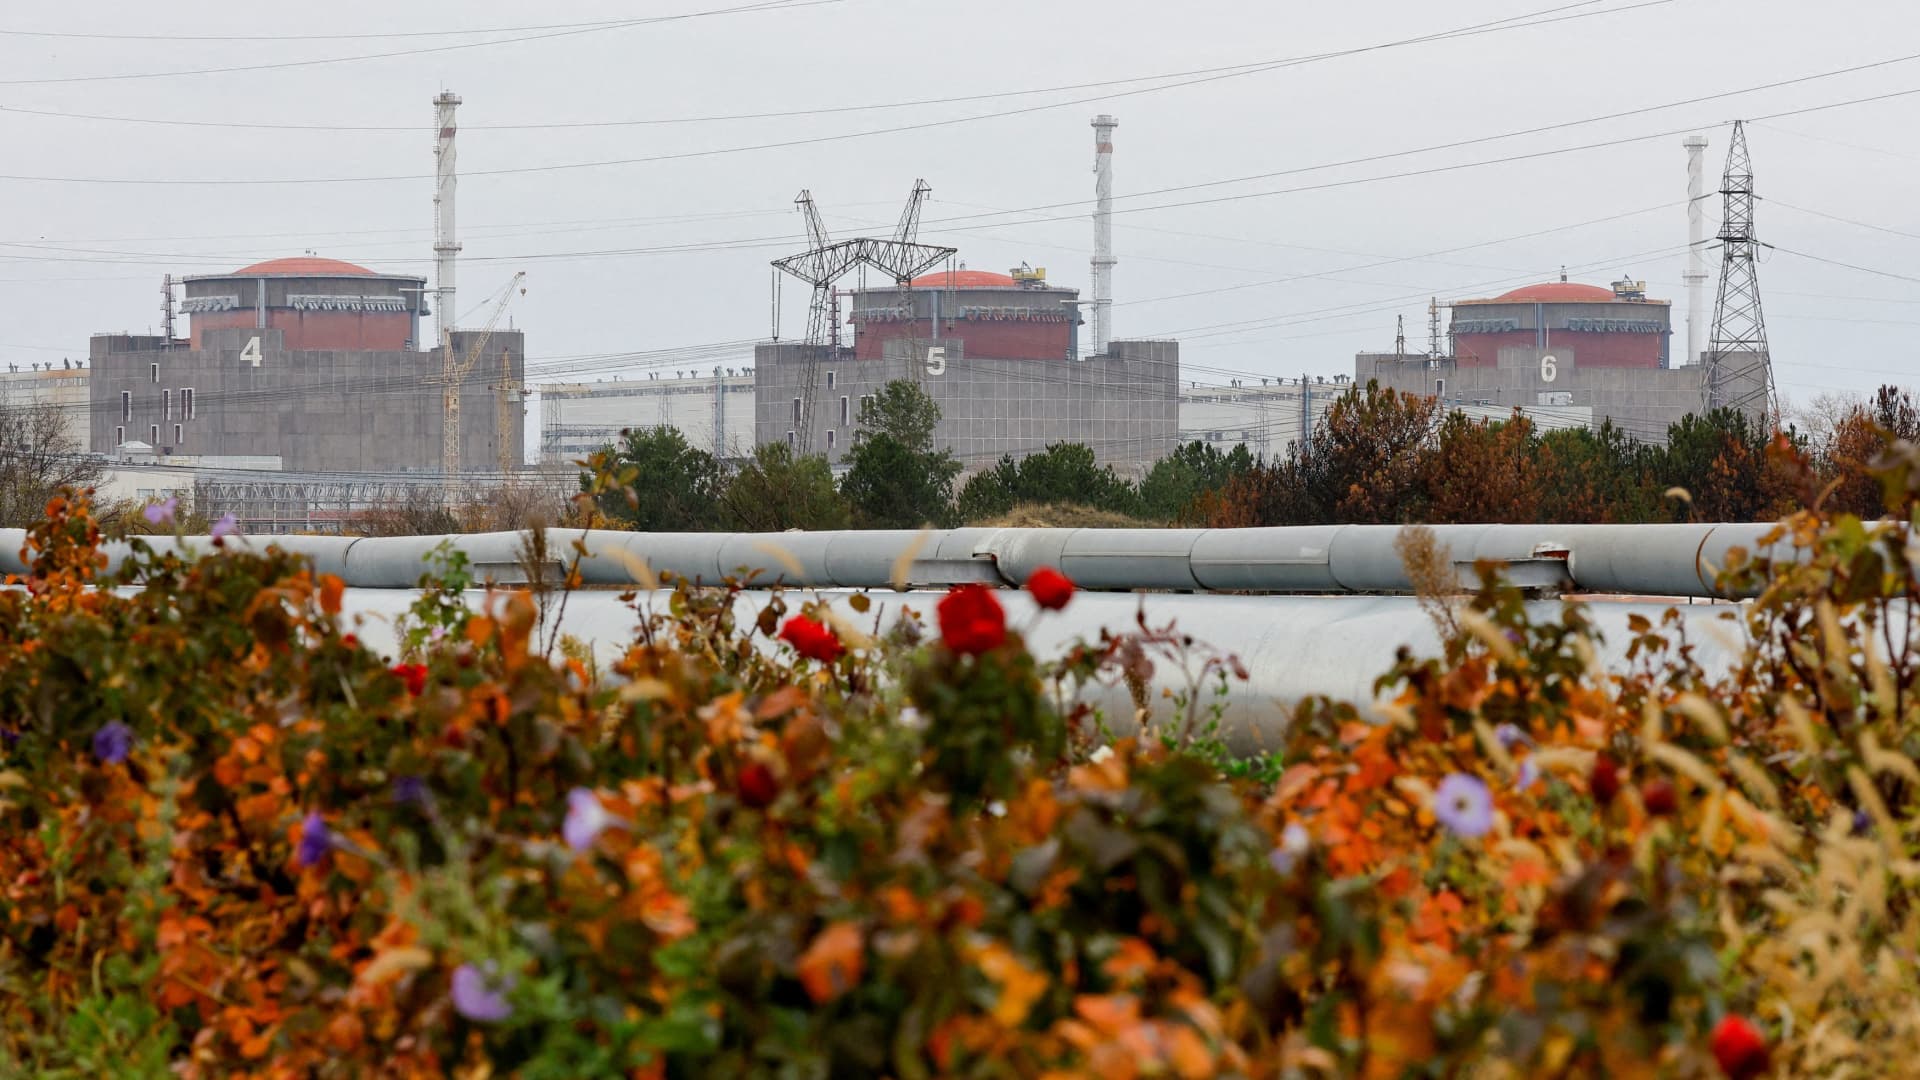 A view shows the Zaporizhzhia Nuclear Power Plant in the course of Russia-Ukraine conflict outside the city of Enerhodar in the Zaporizhzhia region, Russian-controlled Ukraine, November 24, 2022.